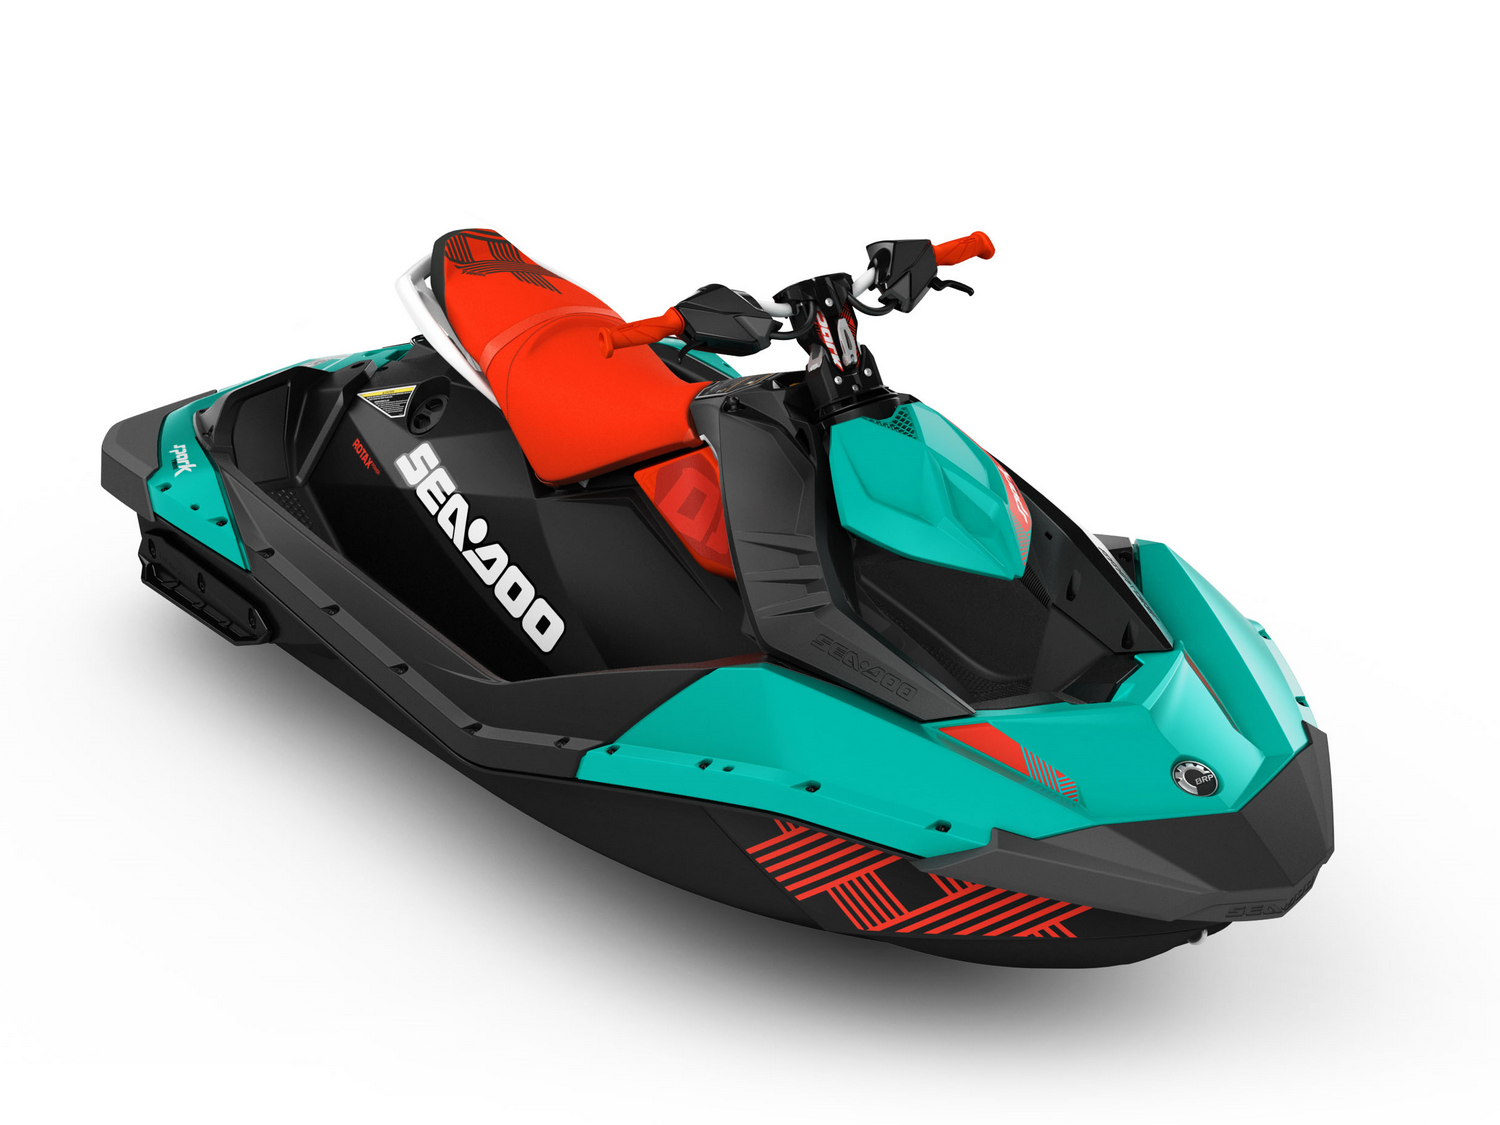 Sea-Doo Spark Trixx: Innovative Features for Tricks and Stunts